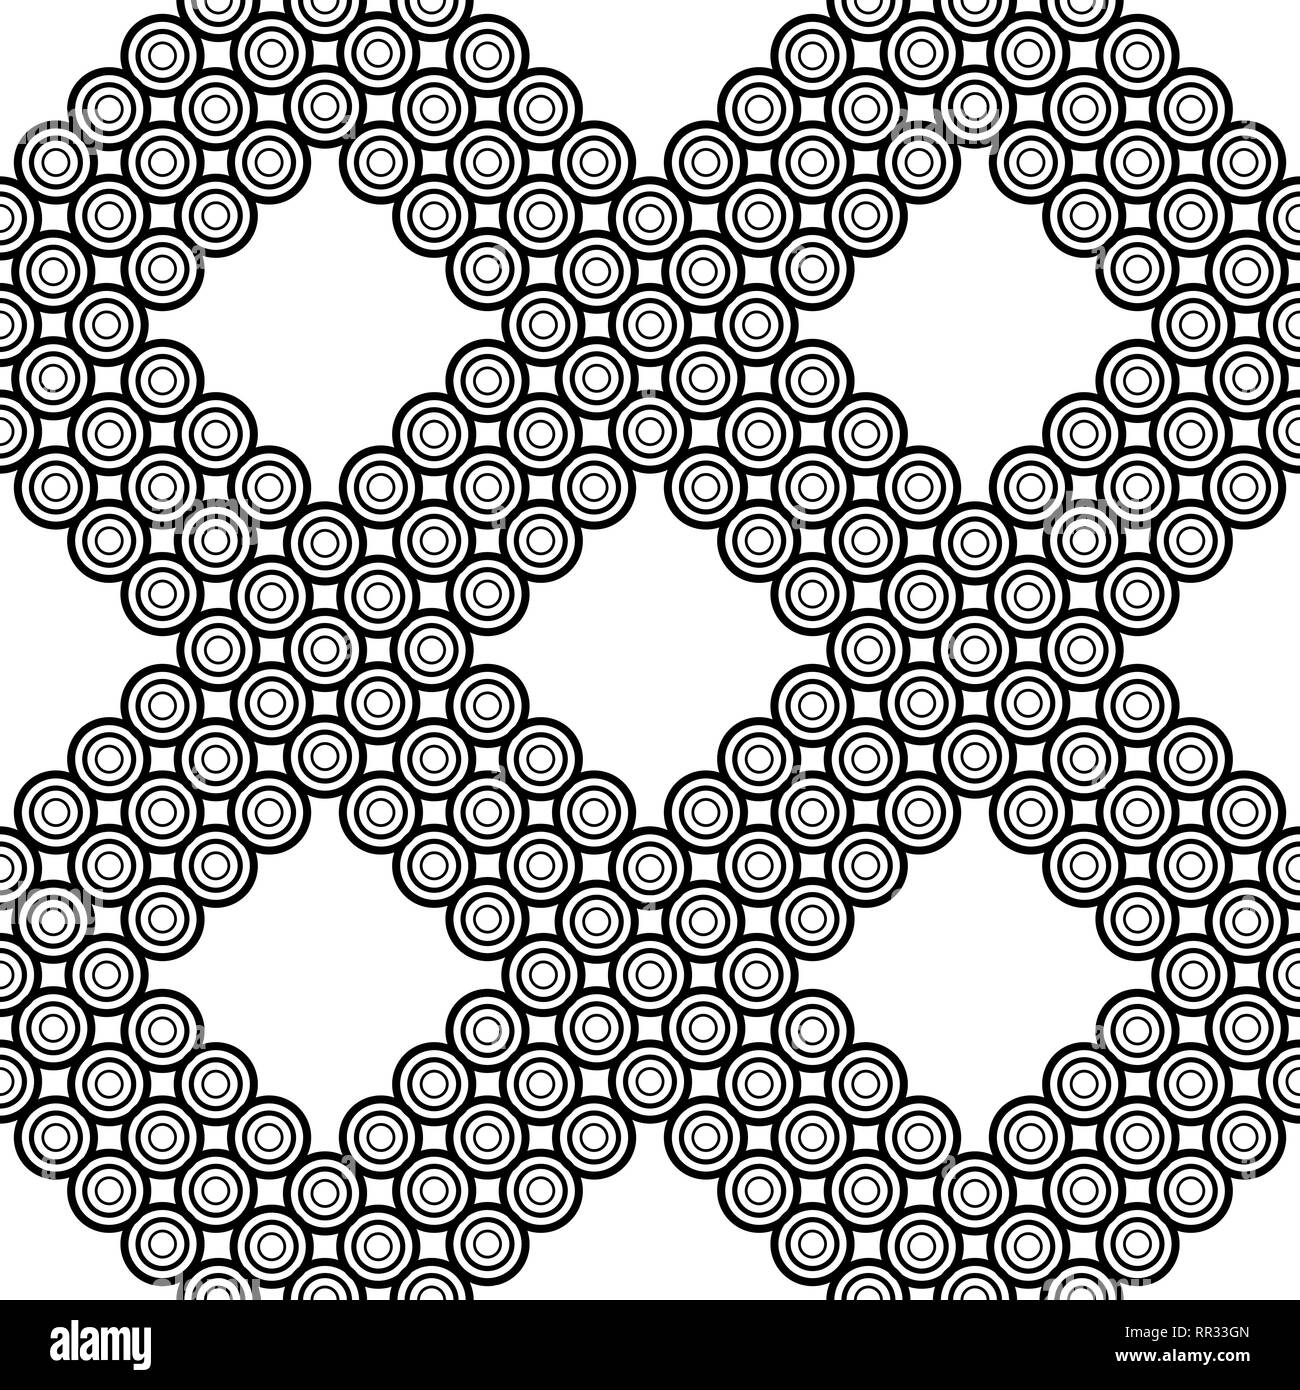 The geometric pattern. Seamless vector background. Black and white texture. Graphic modern pattern. Stock Vector